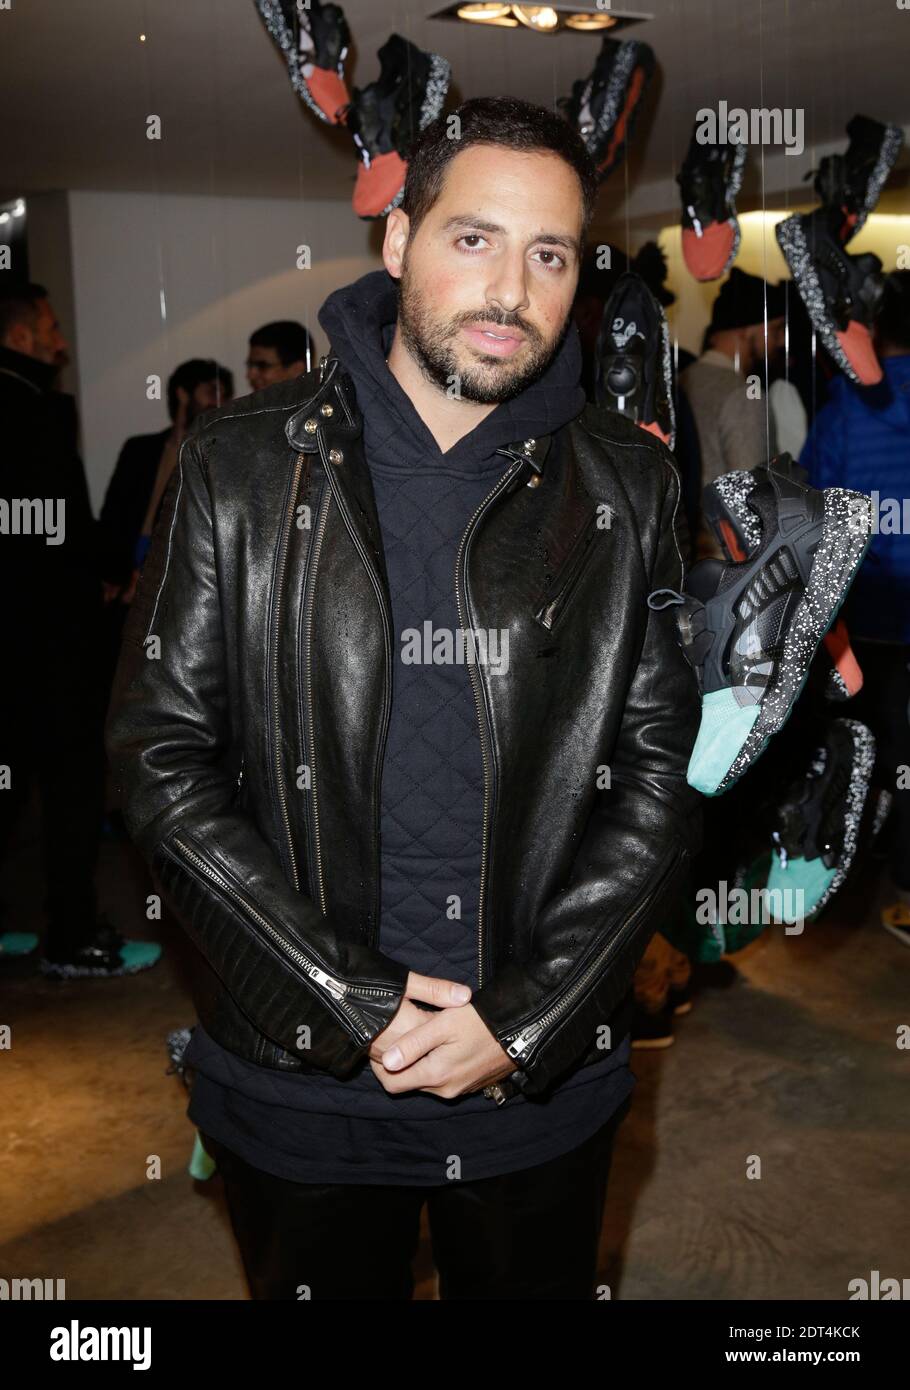 Ronnie Fieg attending the 'Puma Pop Up' Store Opening party in Paris,  France, on January 15, 2014. Photo by Jerome Domine/ABACAPRESS.COM Stock  Photo - Alamy